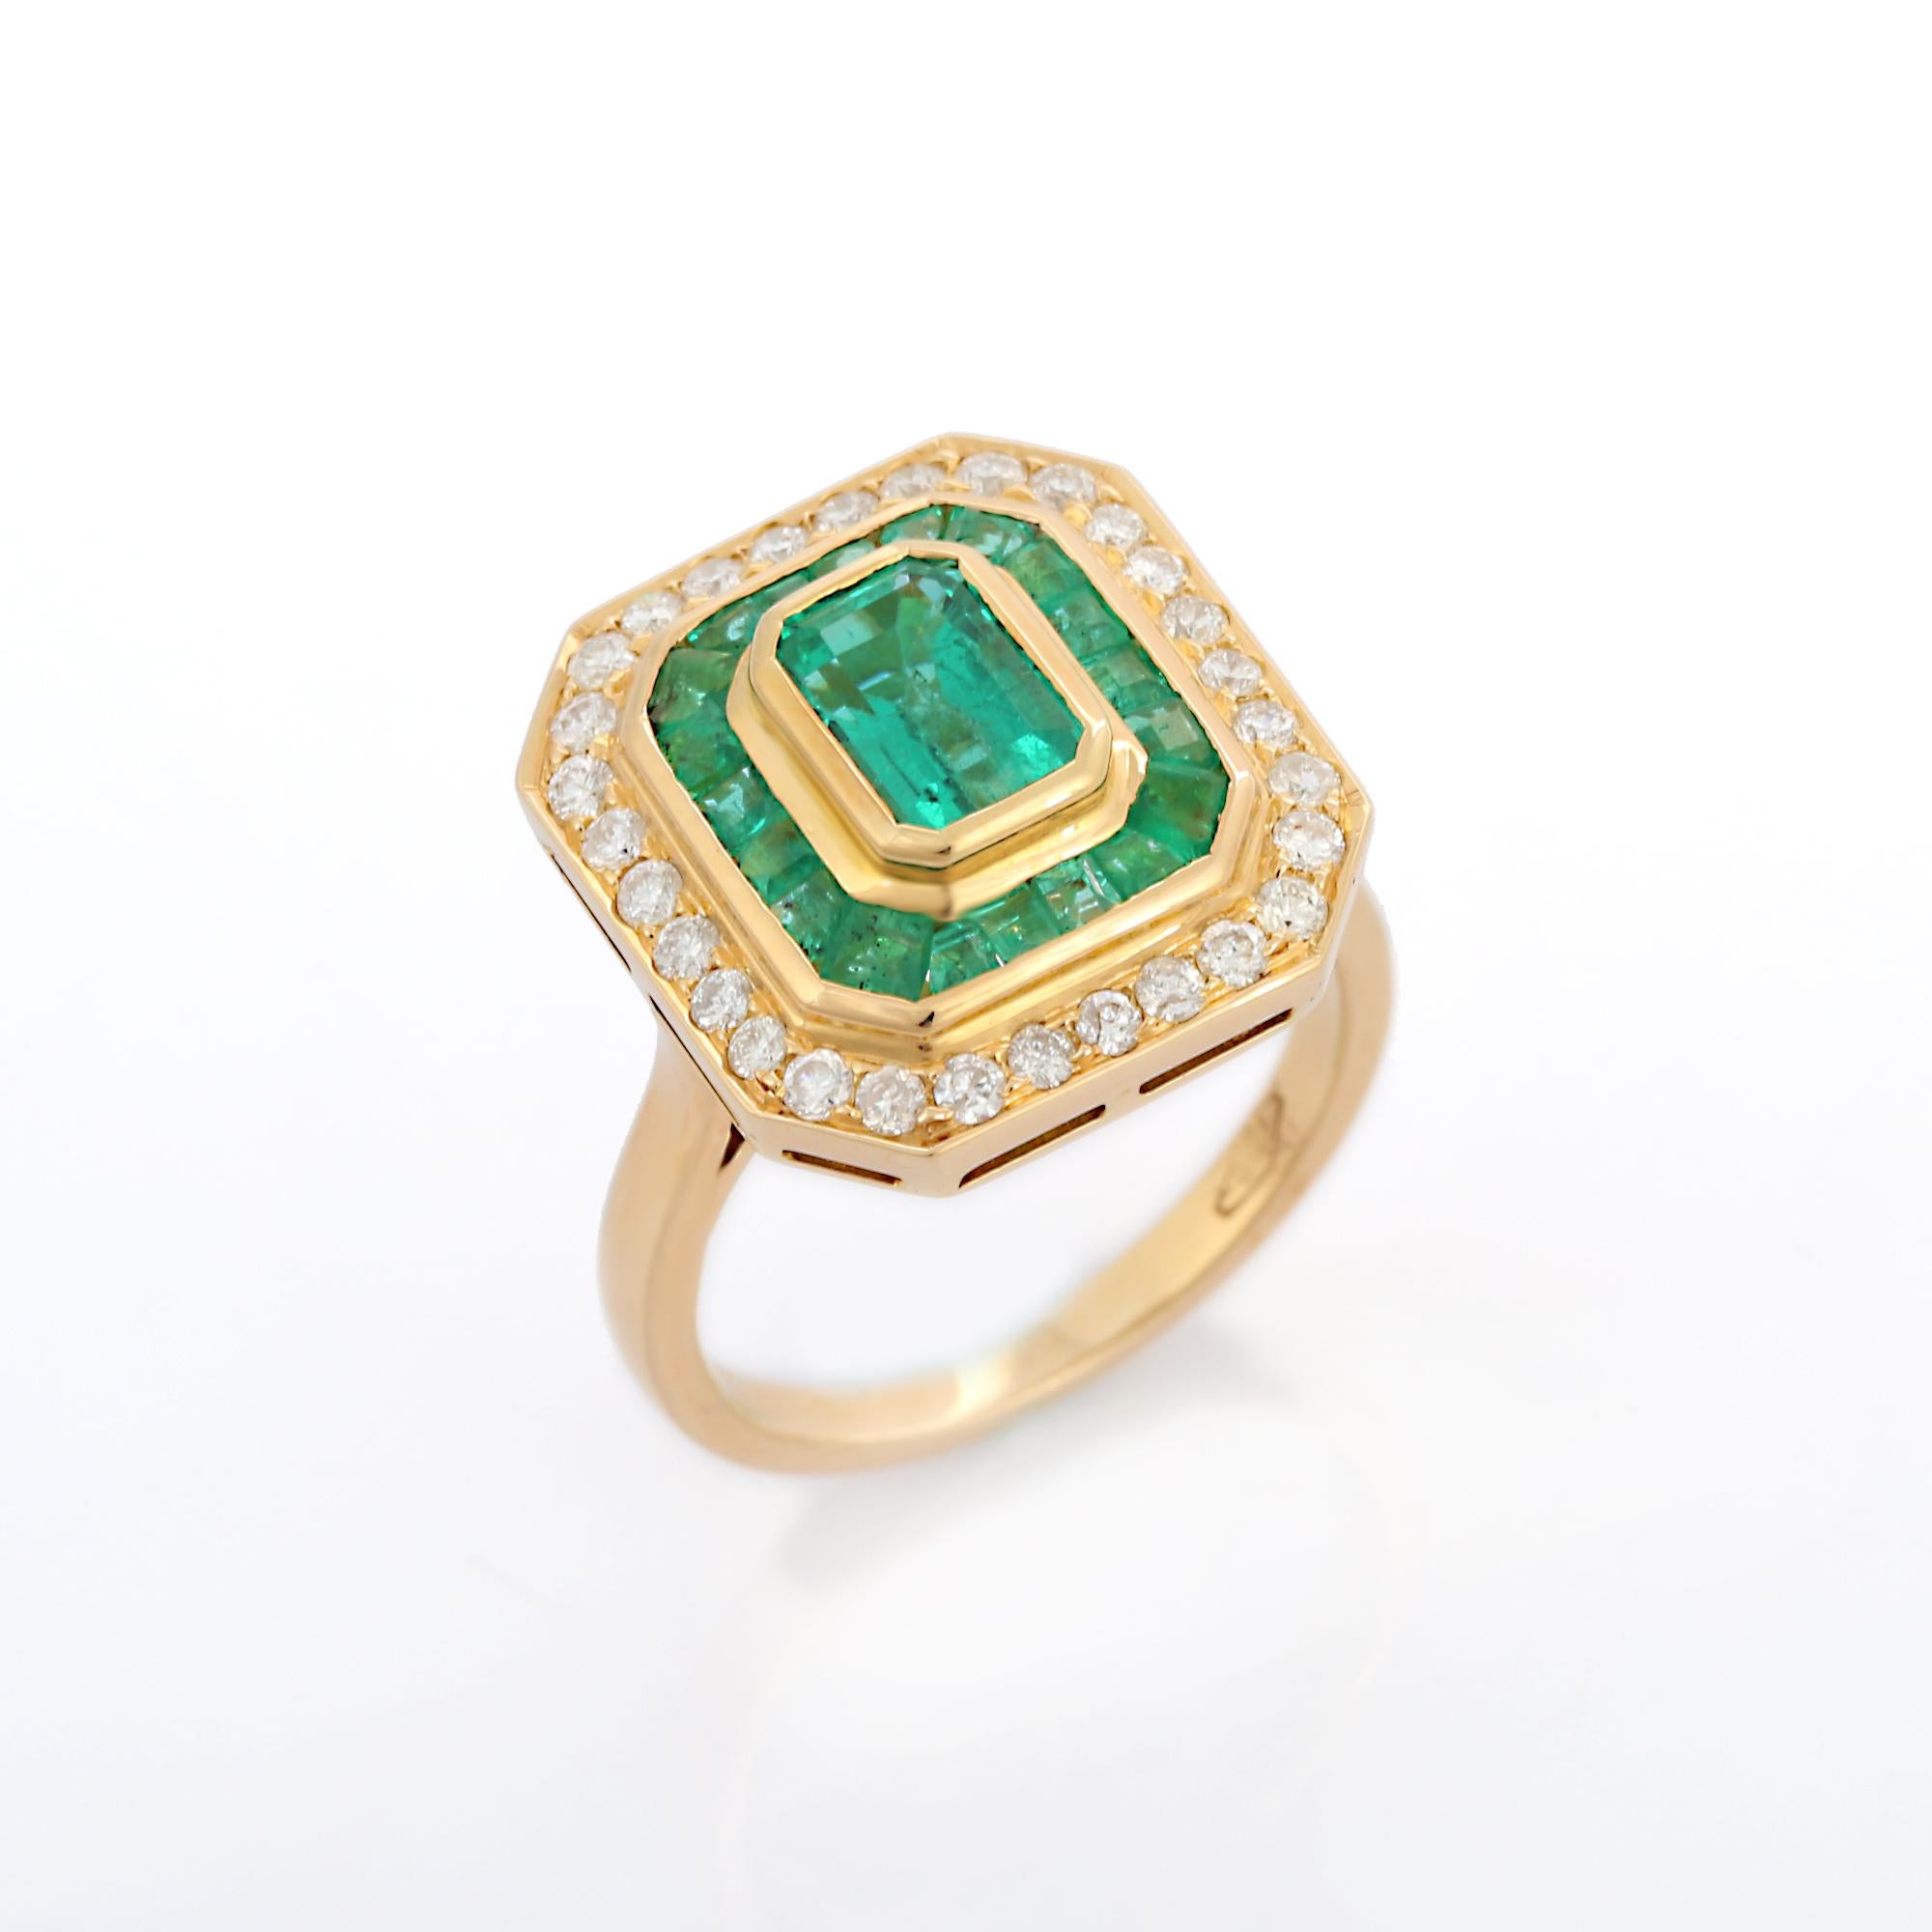 For Sale:  3.03 CTW Diamond and Emerald Cocktail Ring in 18 Karat Solid Yellow Gold 7